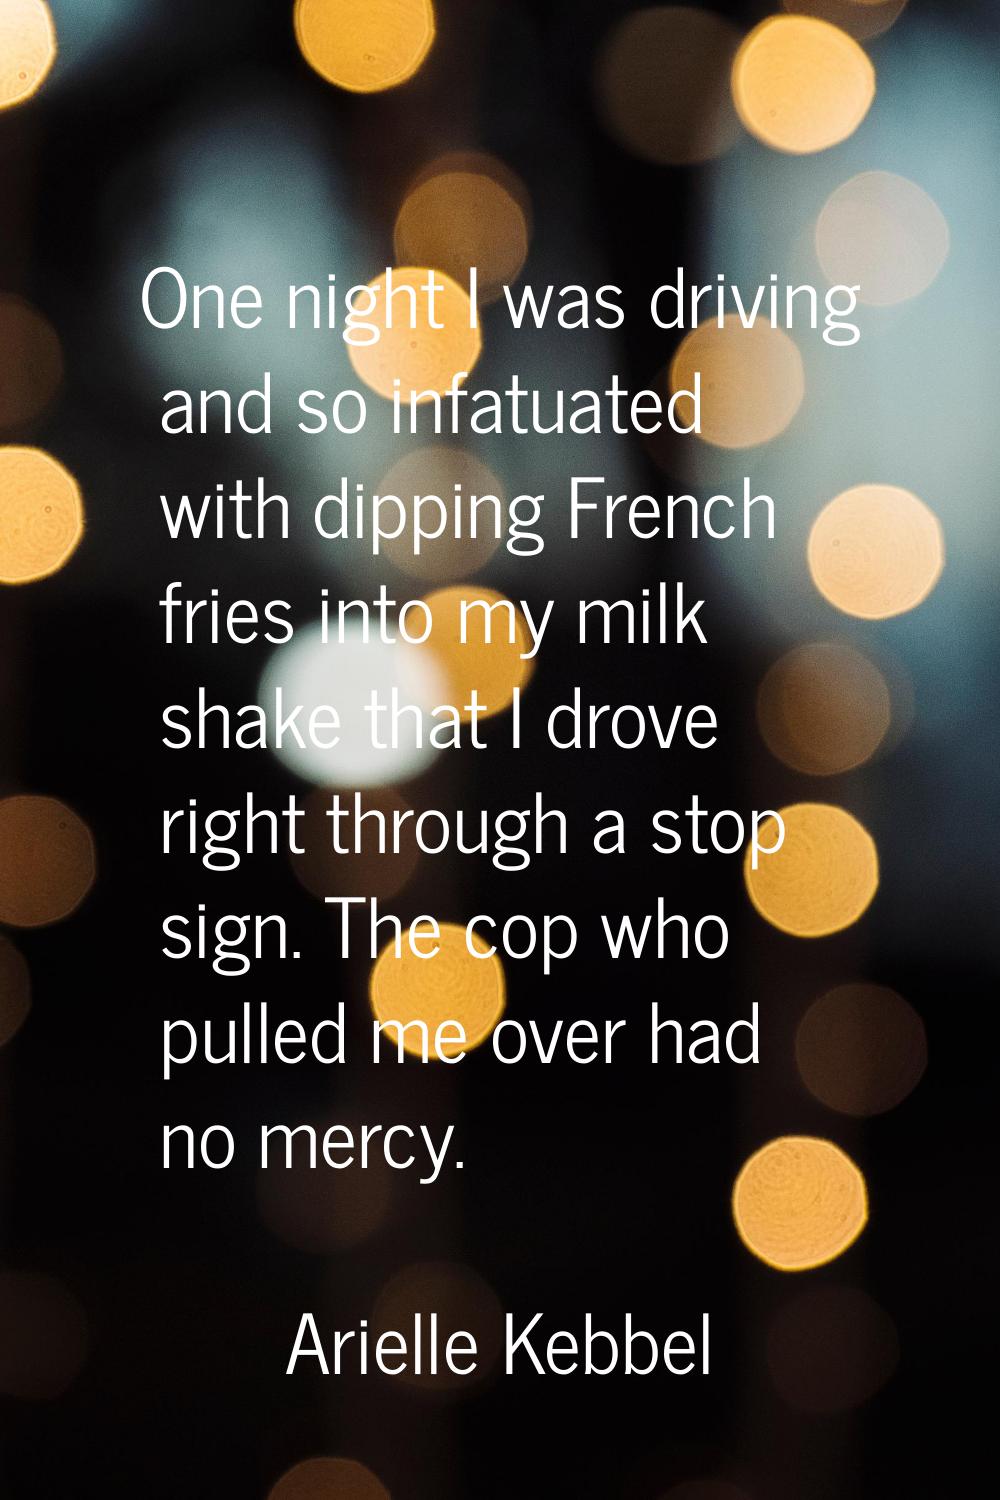 One night I was driving and so infatuated with dipping French fries into my milk shake that I drove